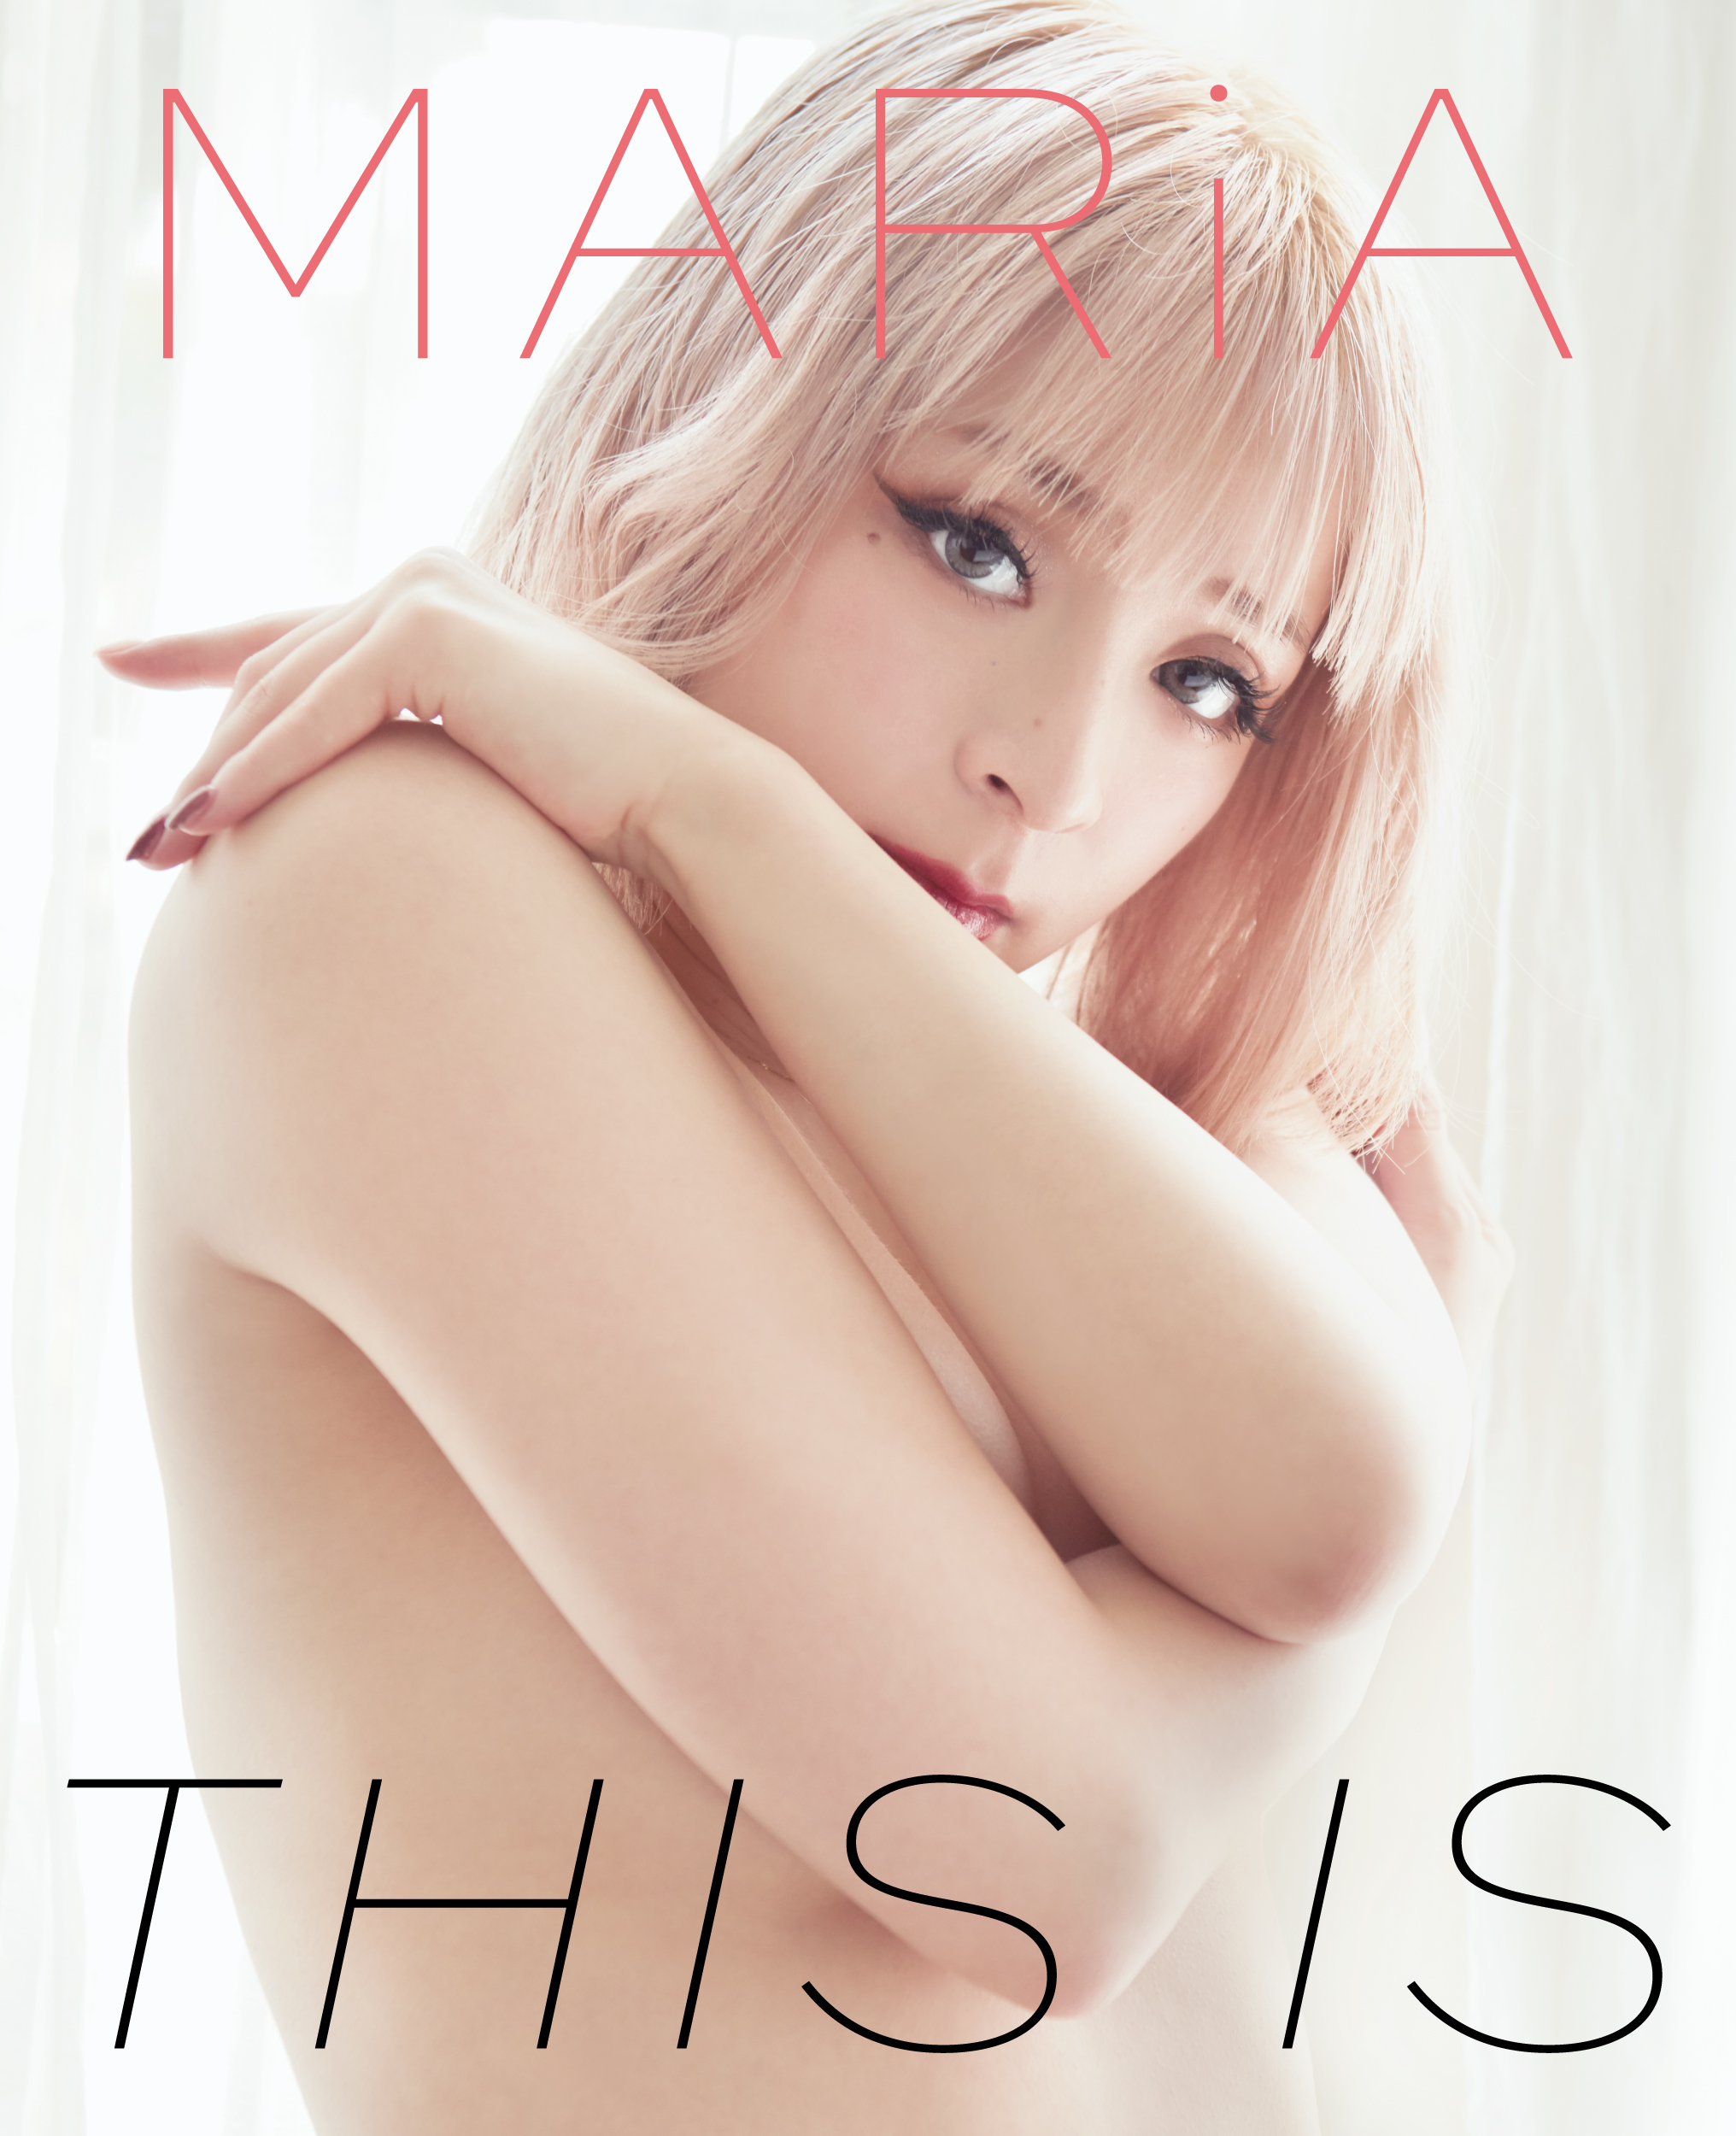 MARiA Photobook “THIS IS” Release on Aug 6th,2021